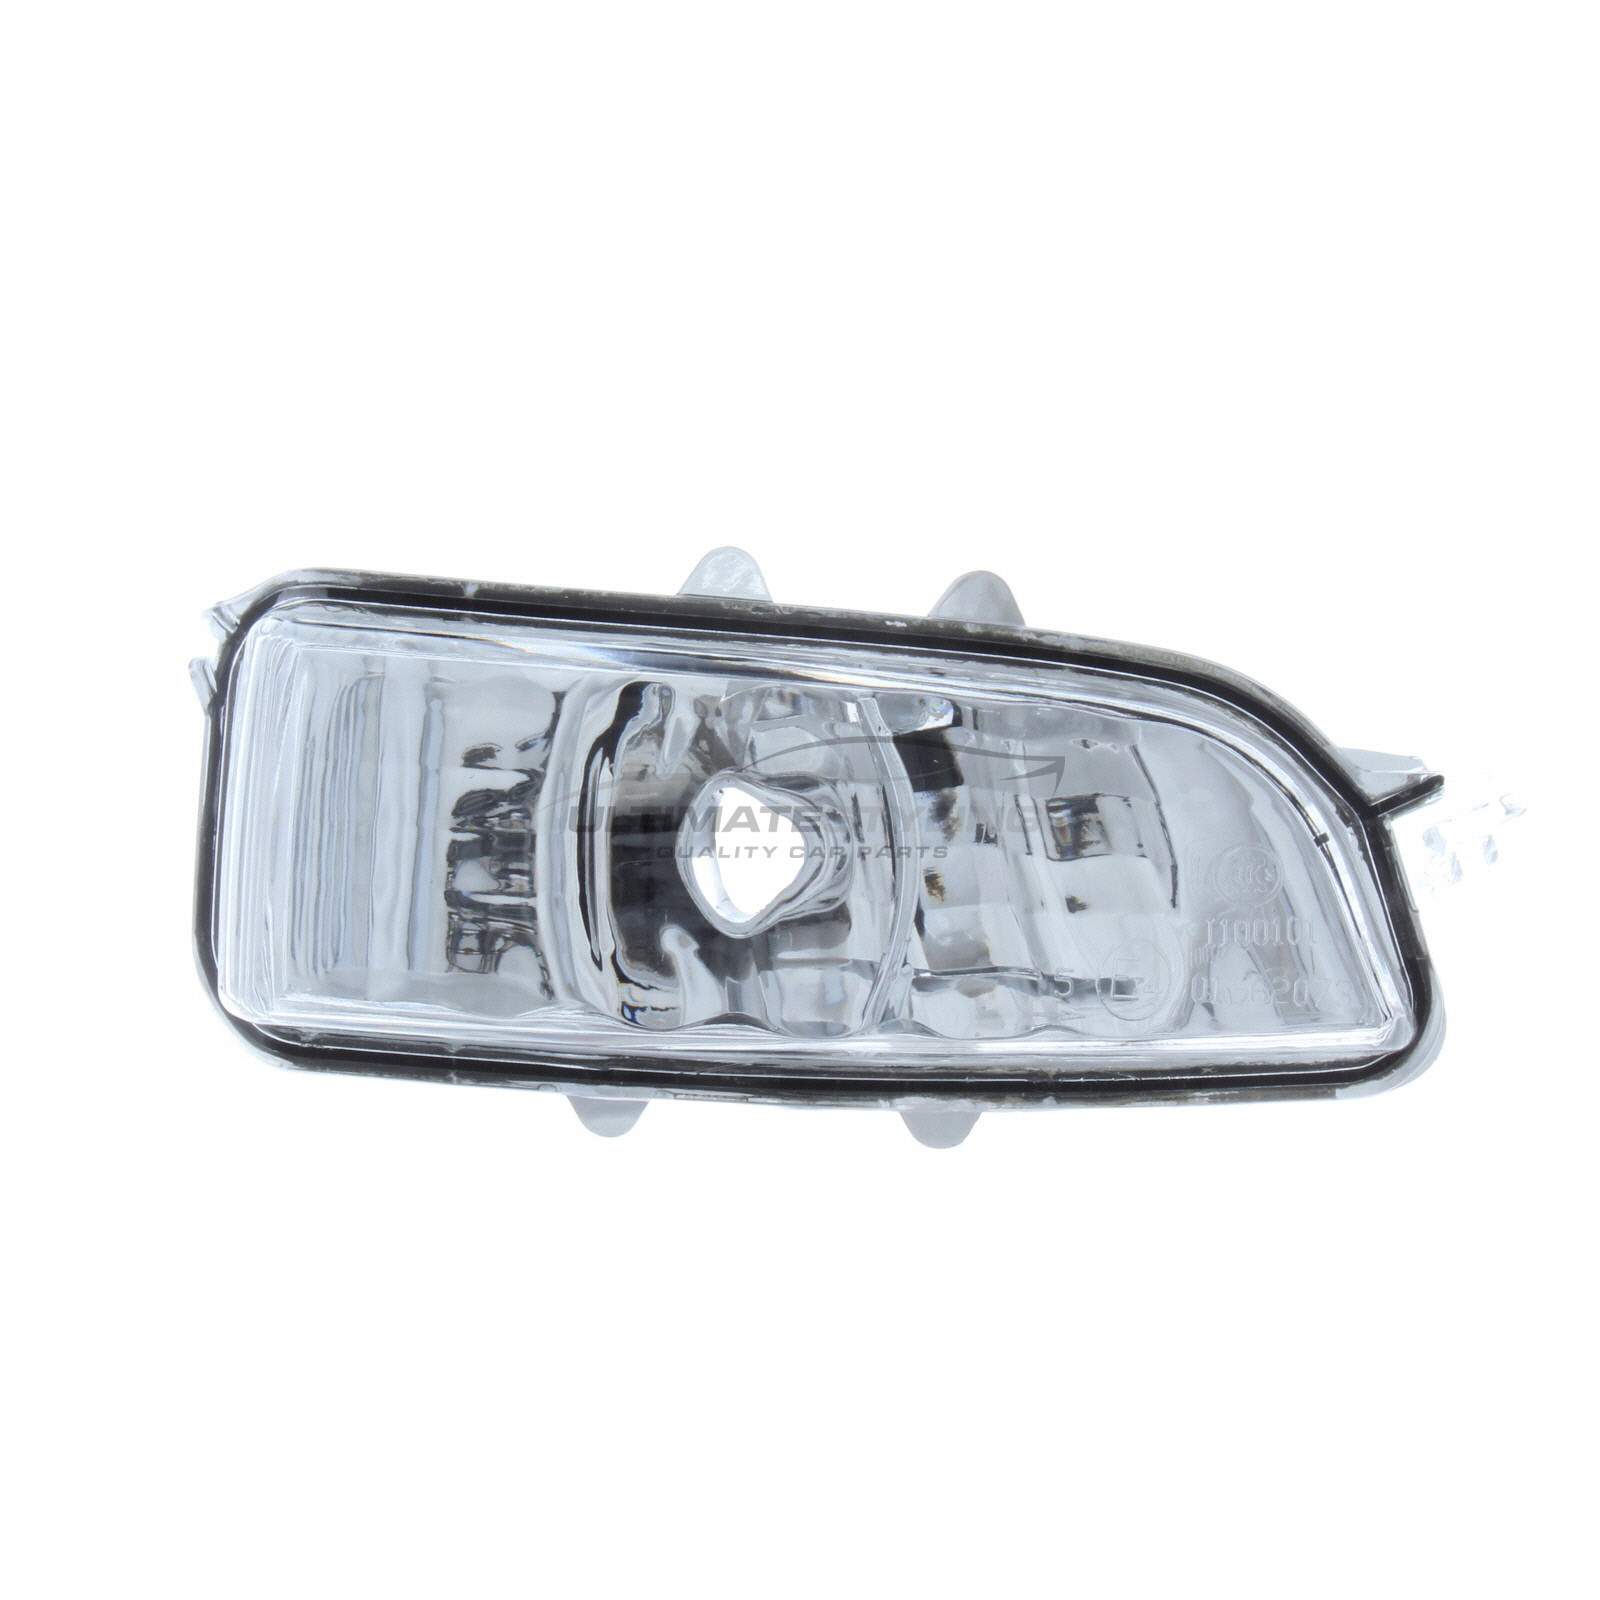 Mirror Indicator for Volvo S80